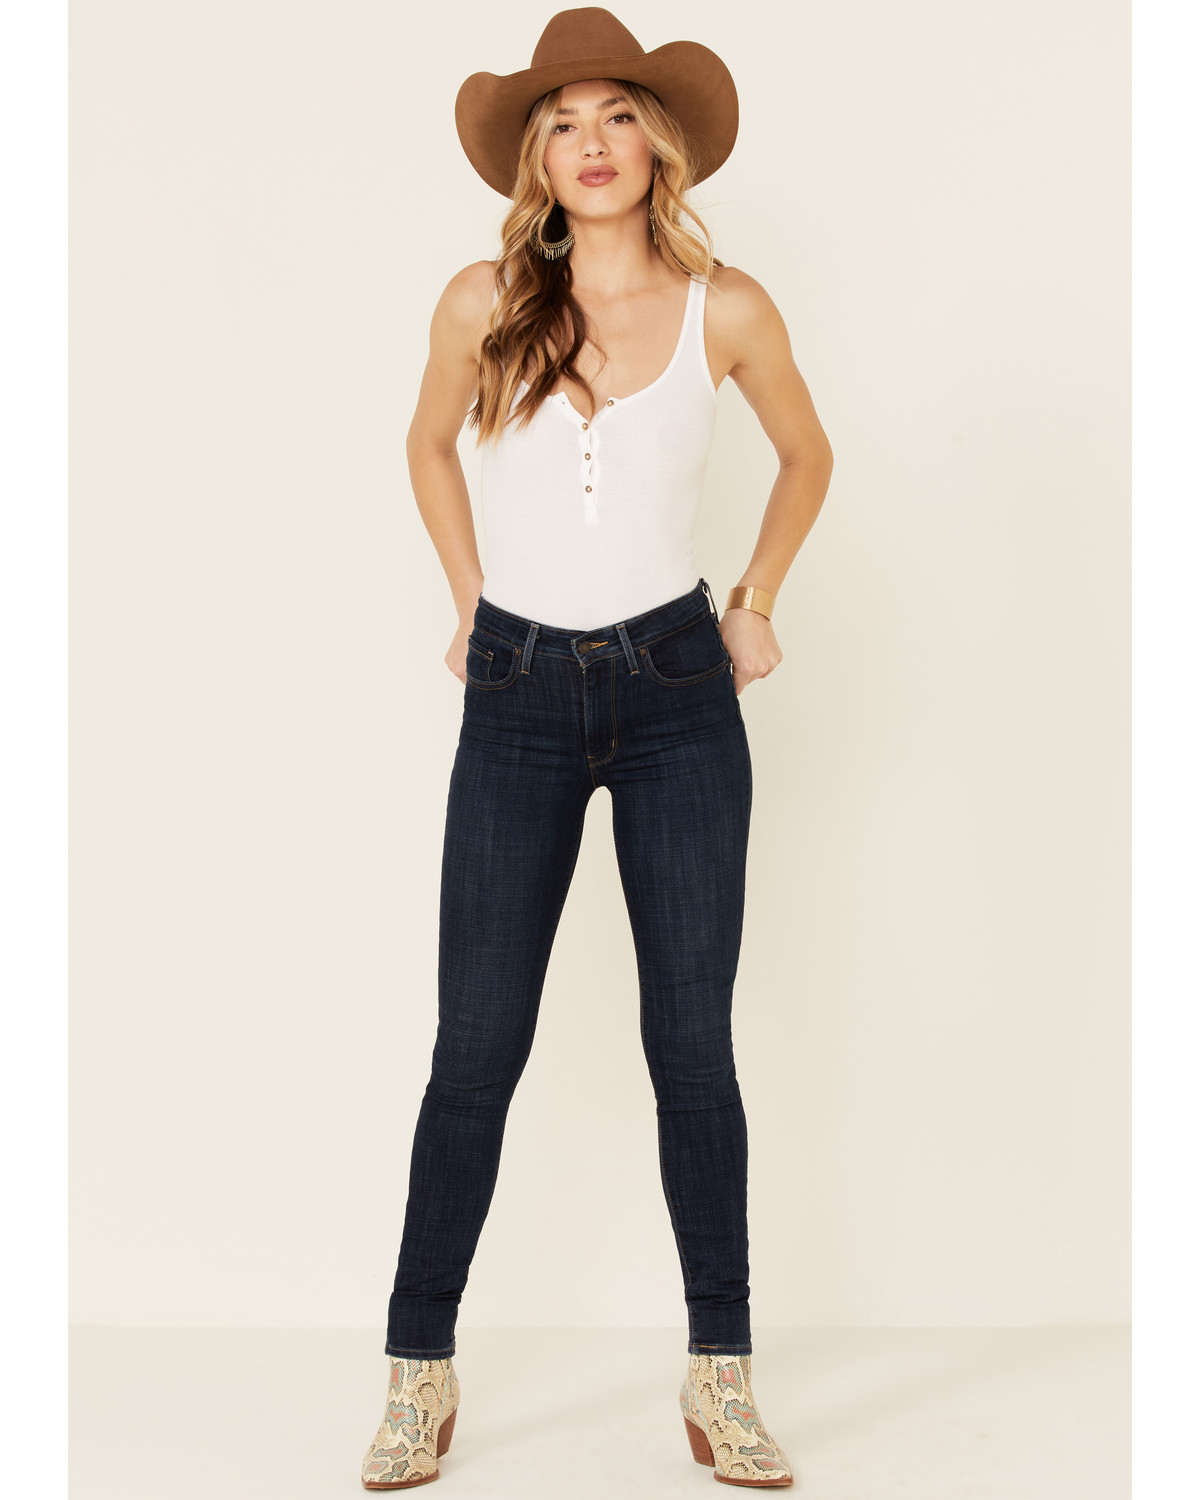 levi's high rise skinny jeans